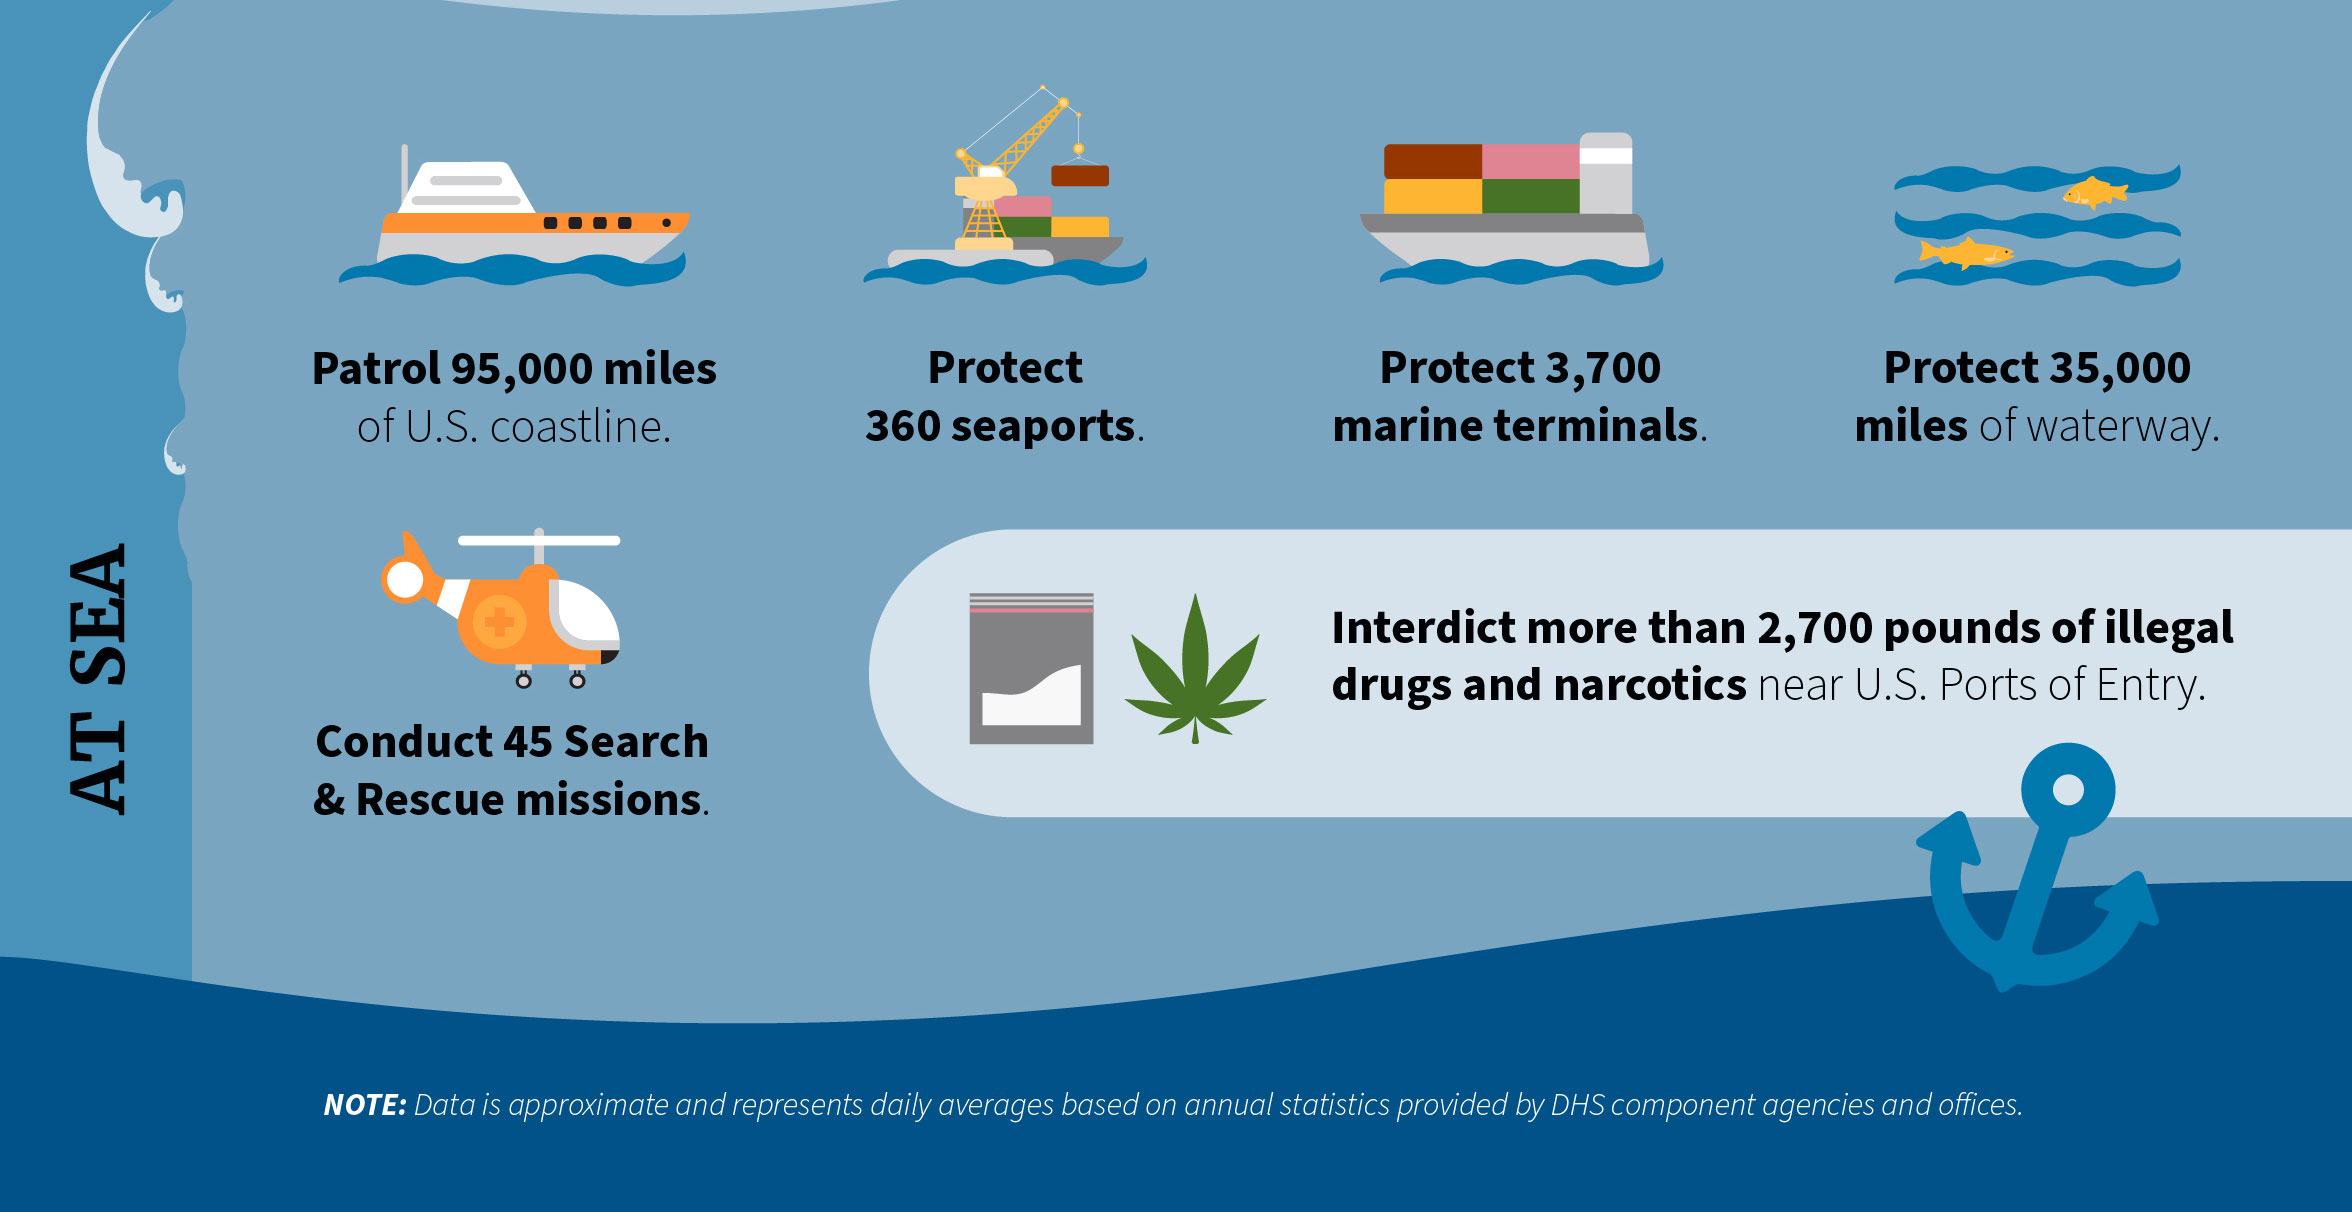 At Sea: Patrol 95,000 miles of U.S. coastline. Protect 360 seaports. Protect 3,700 marine terminals. Protect 35,000 miles of waterway. Conduct 45 search & rescue missions. Interdict more than 2,700 pounds of illegal drugs and narcotics near U.S. Ports of Entry. Note: Data is approximate and represents daily averages based on annual statistics provided by DHS component agencies and offices.